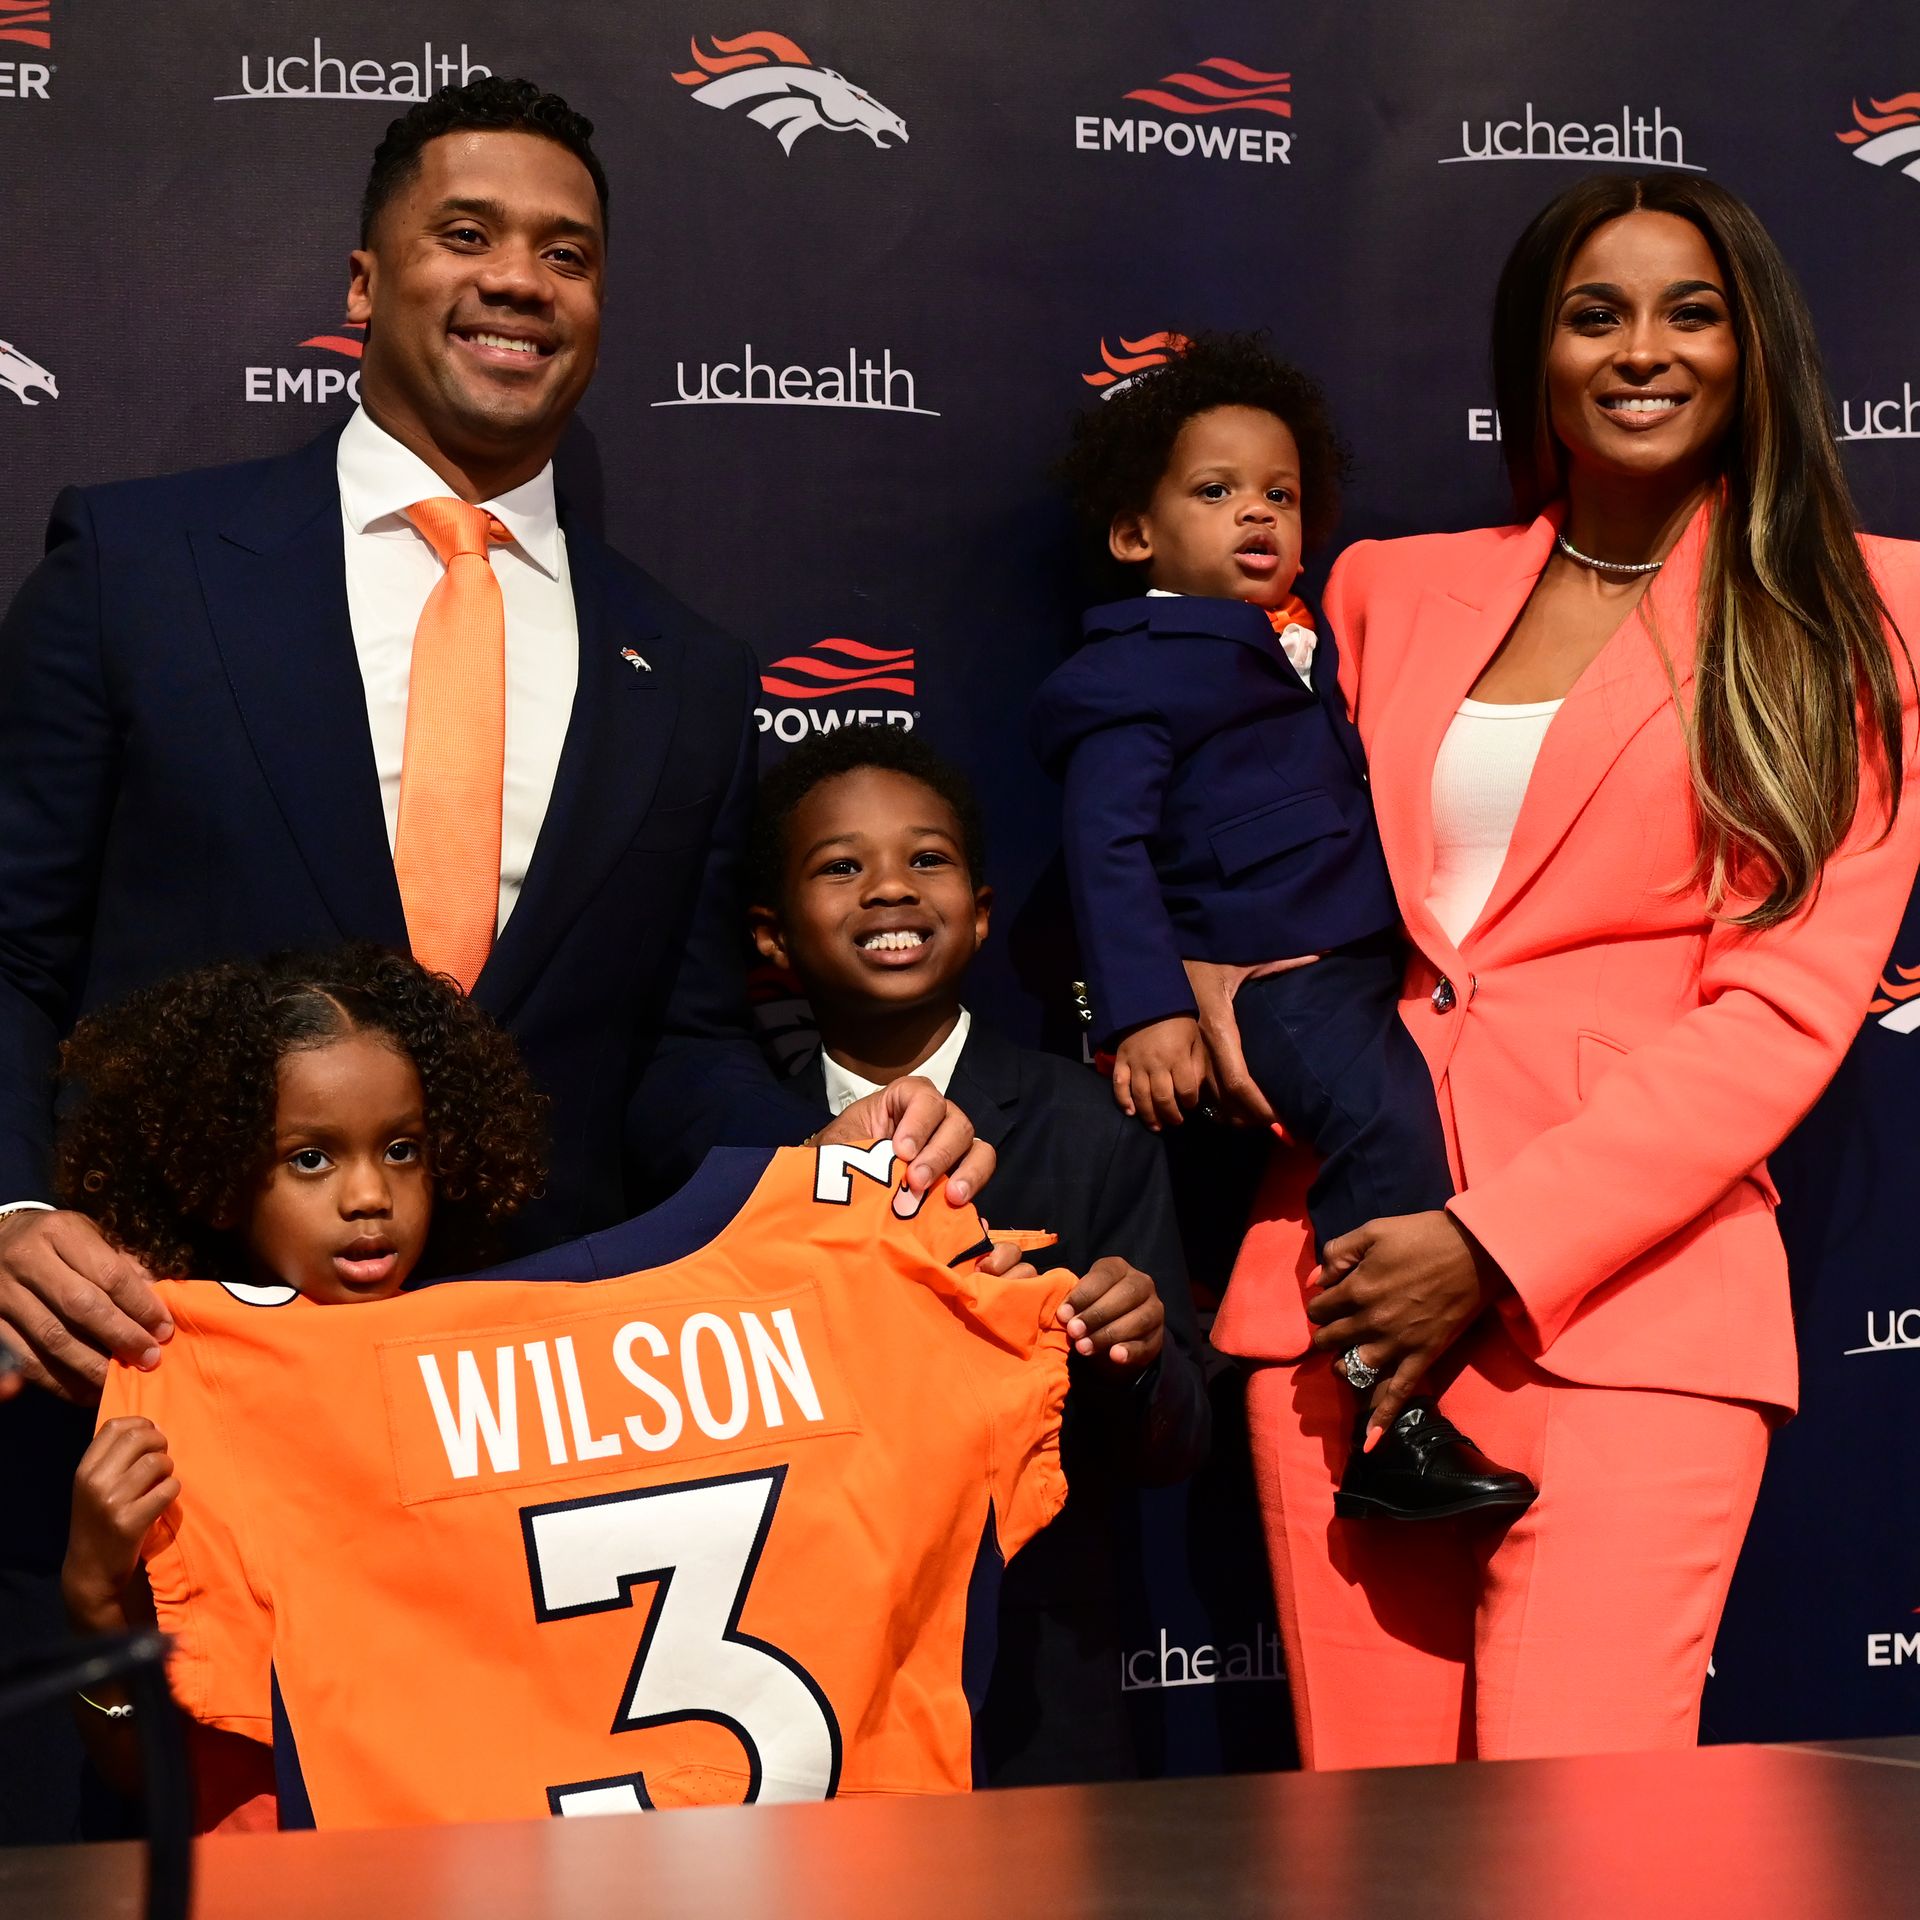 Quarterback Russell Wilson is introduced at Denver Broncos Headquarters in Englewood, Colorado on Wednesday, March 16. Also pictured are his wife Ciara, right, children.